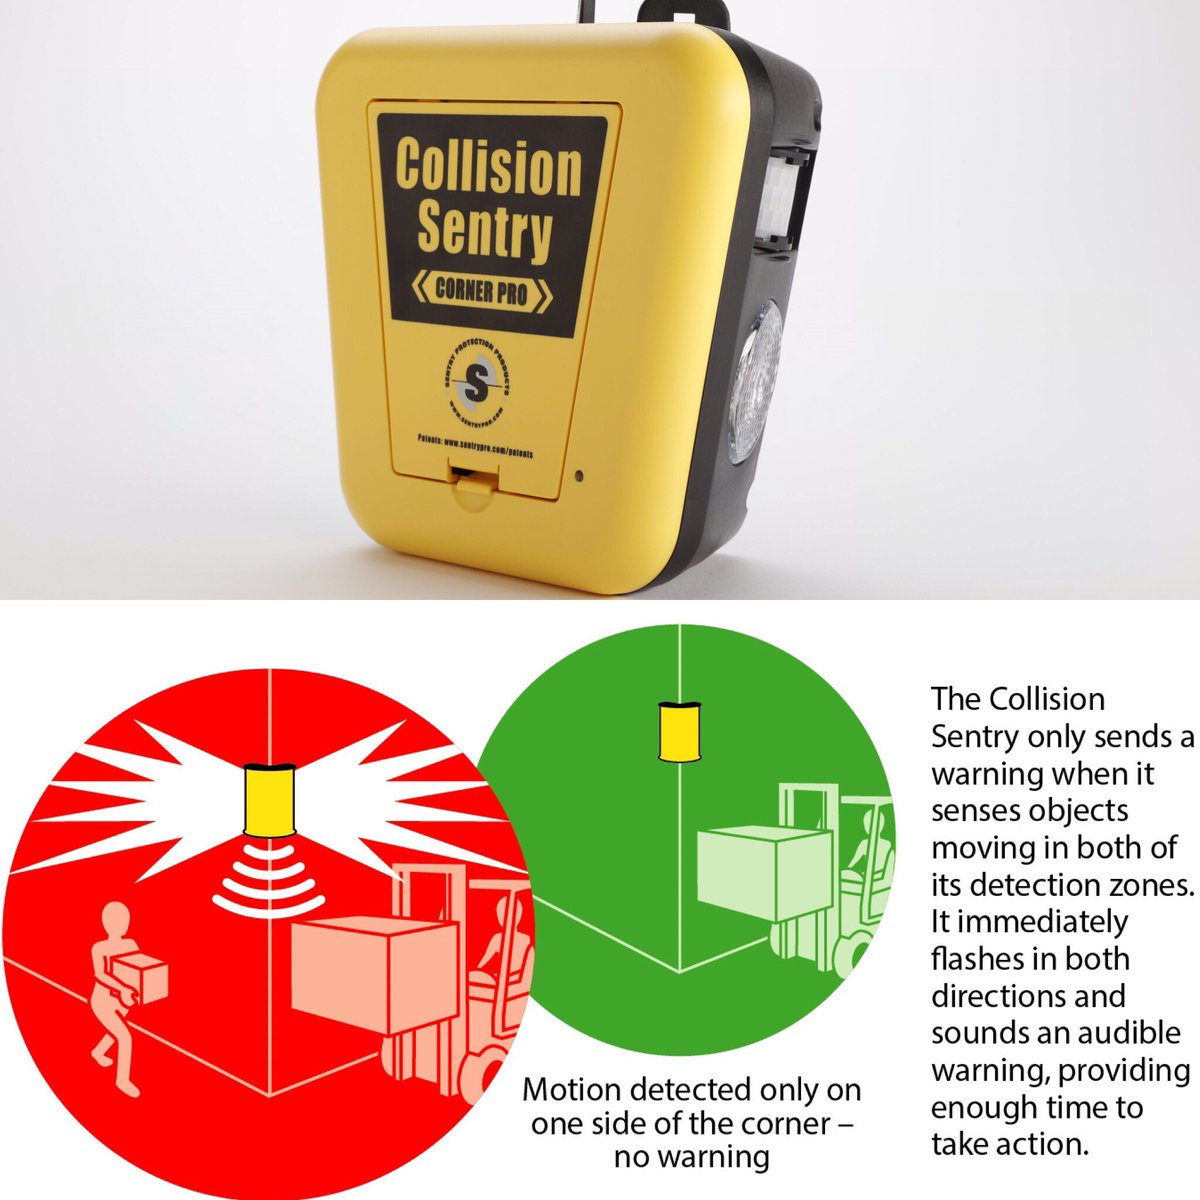 Collision Sentry Corner Pro IR Detection Unit 200 with LED and sound